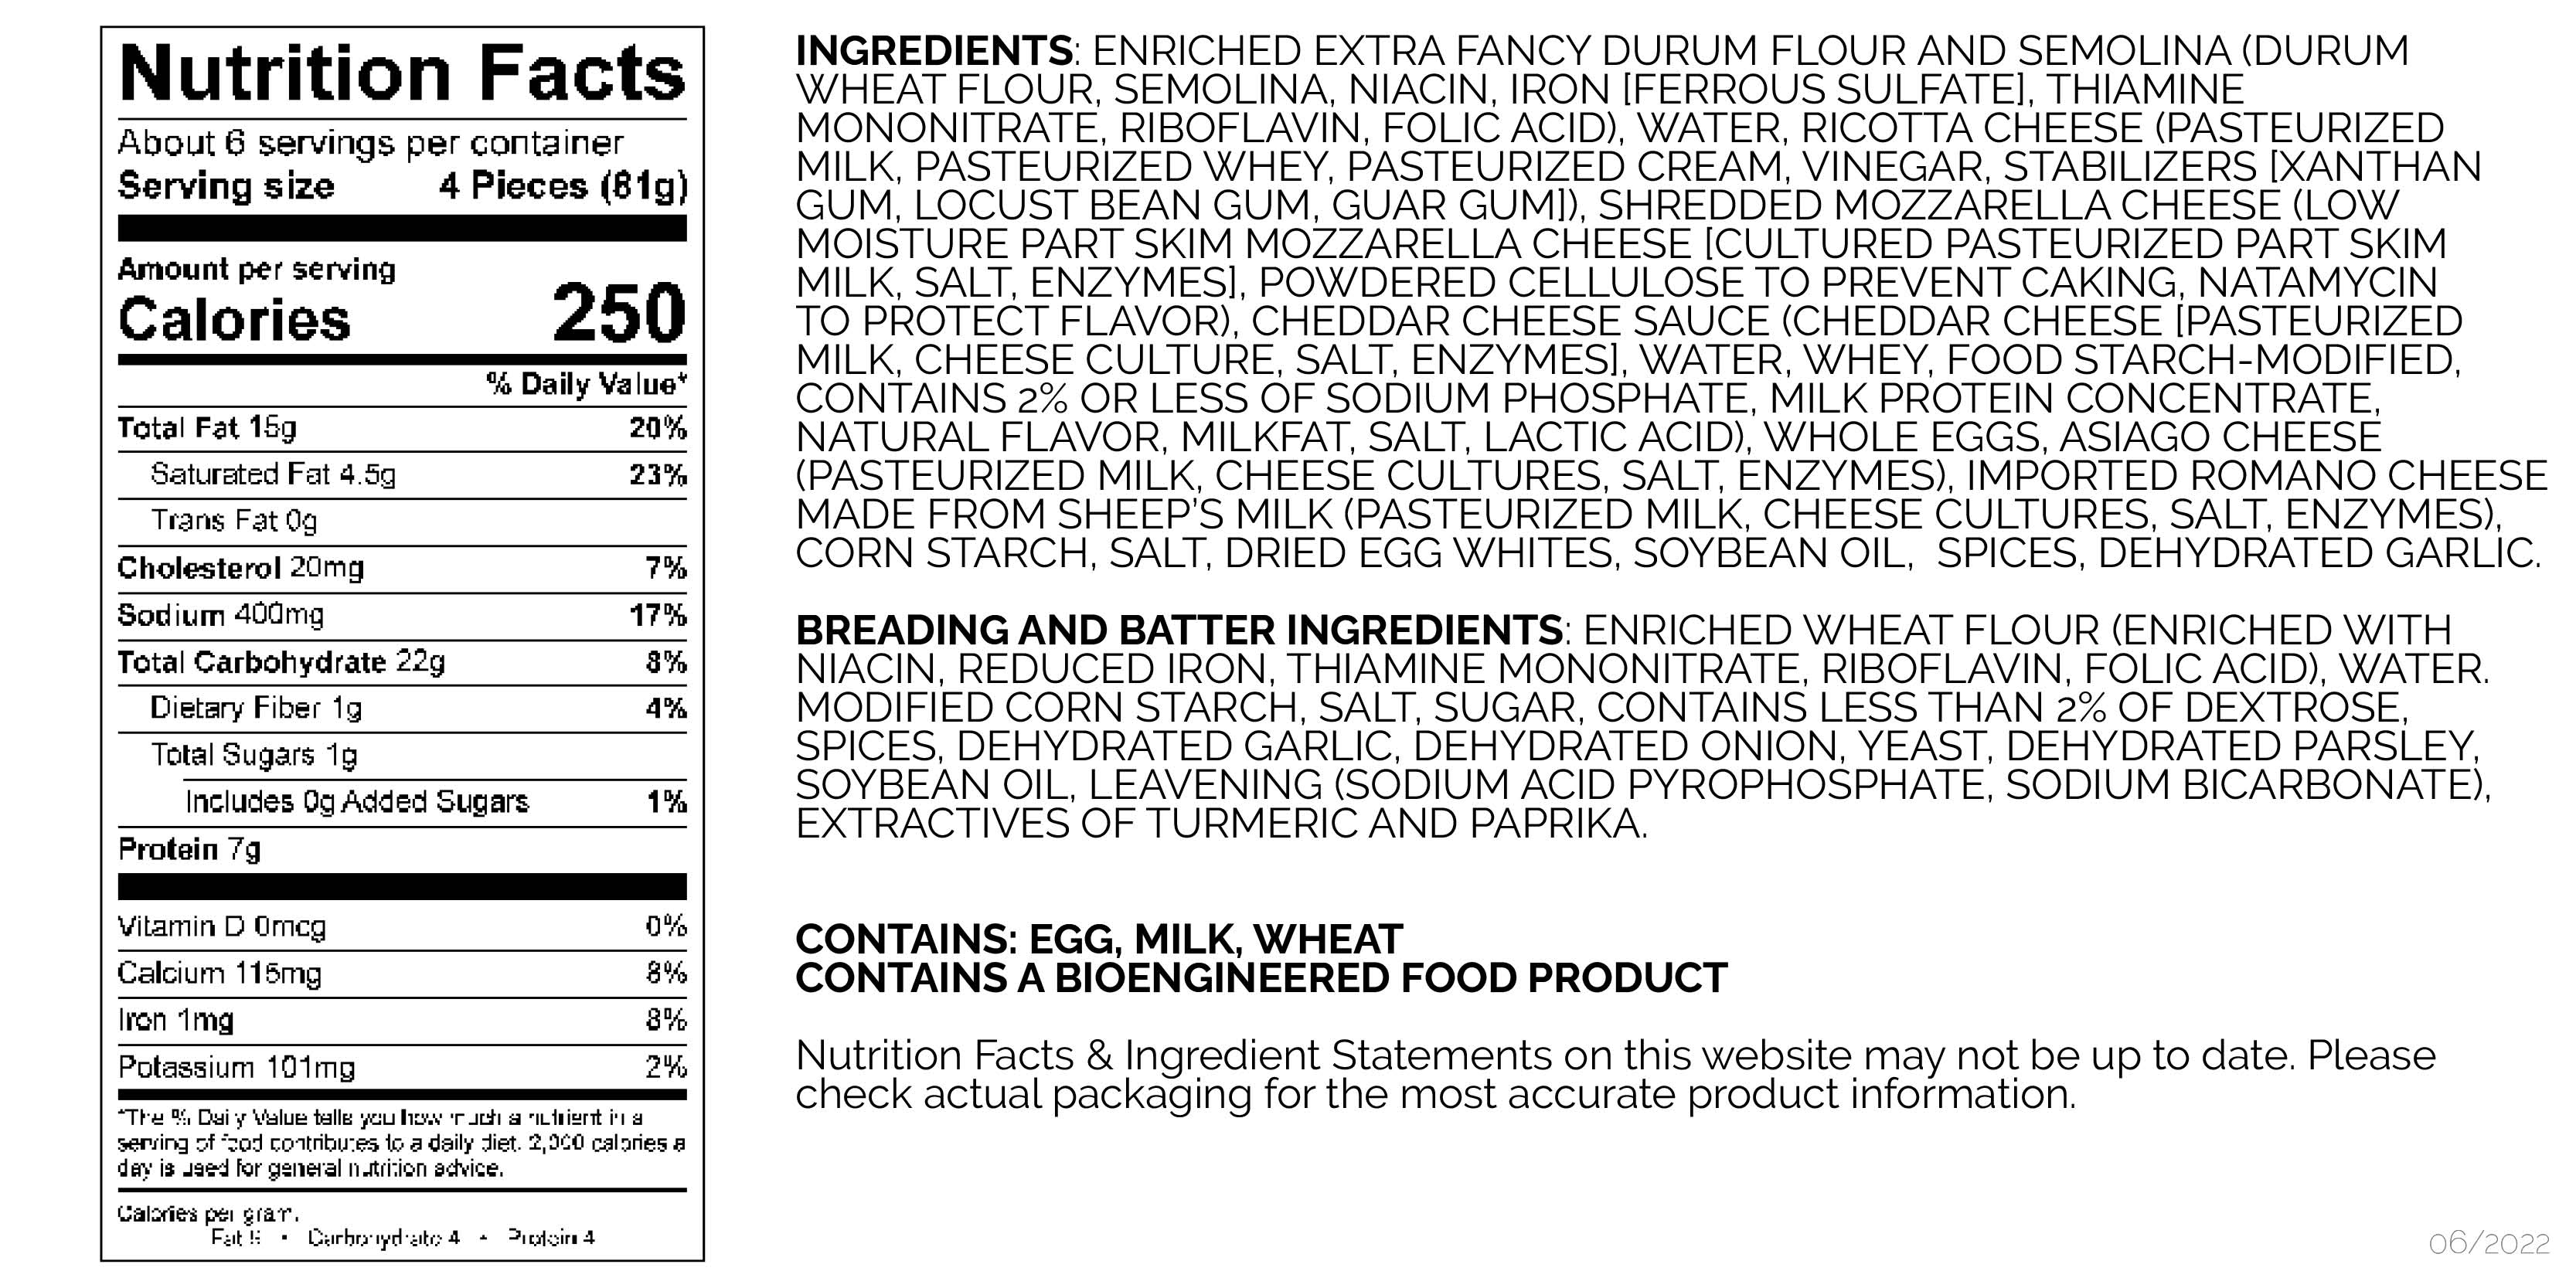 Product Nutrition Facts & Ingredient Statement